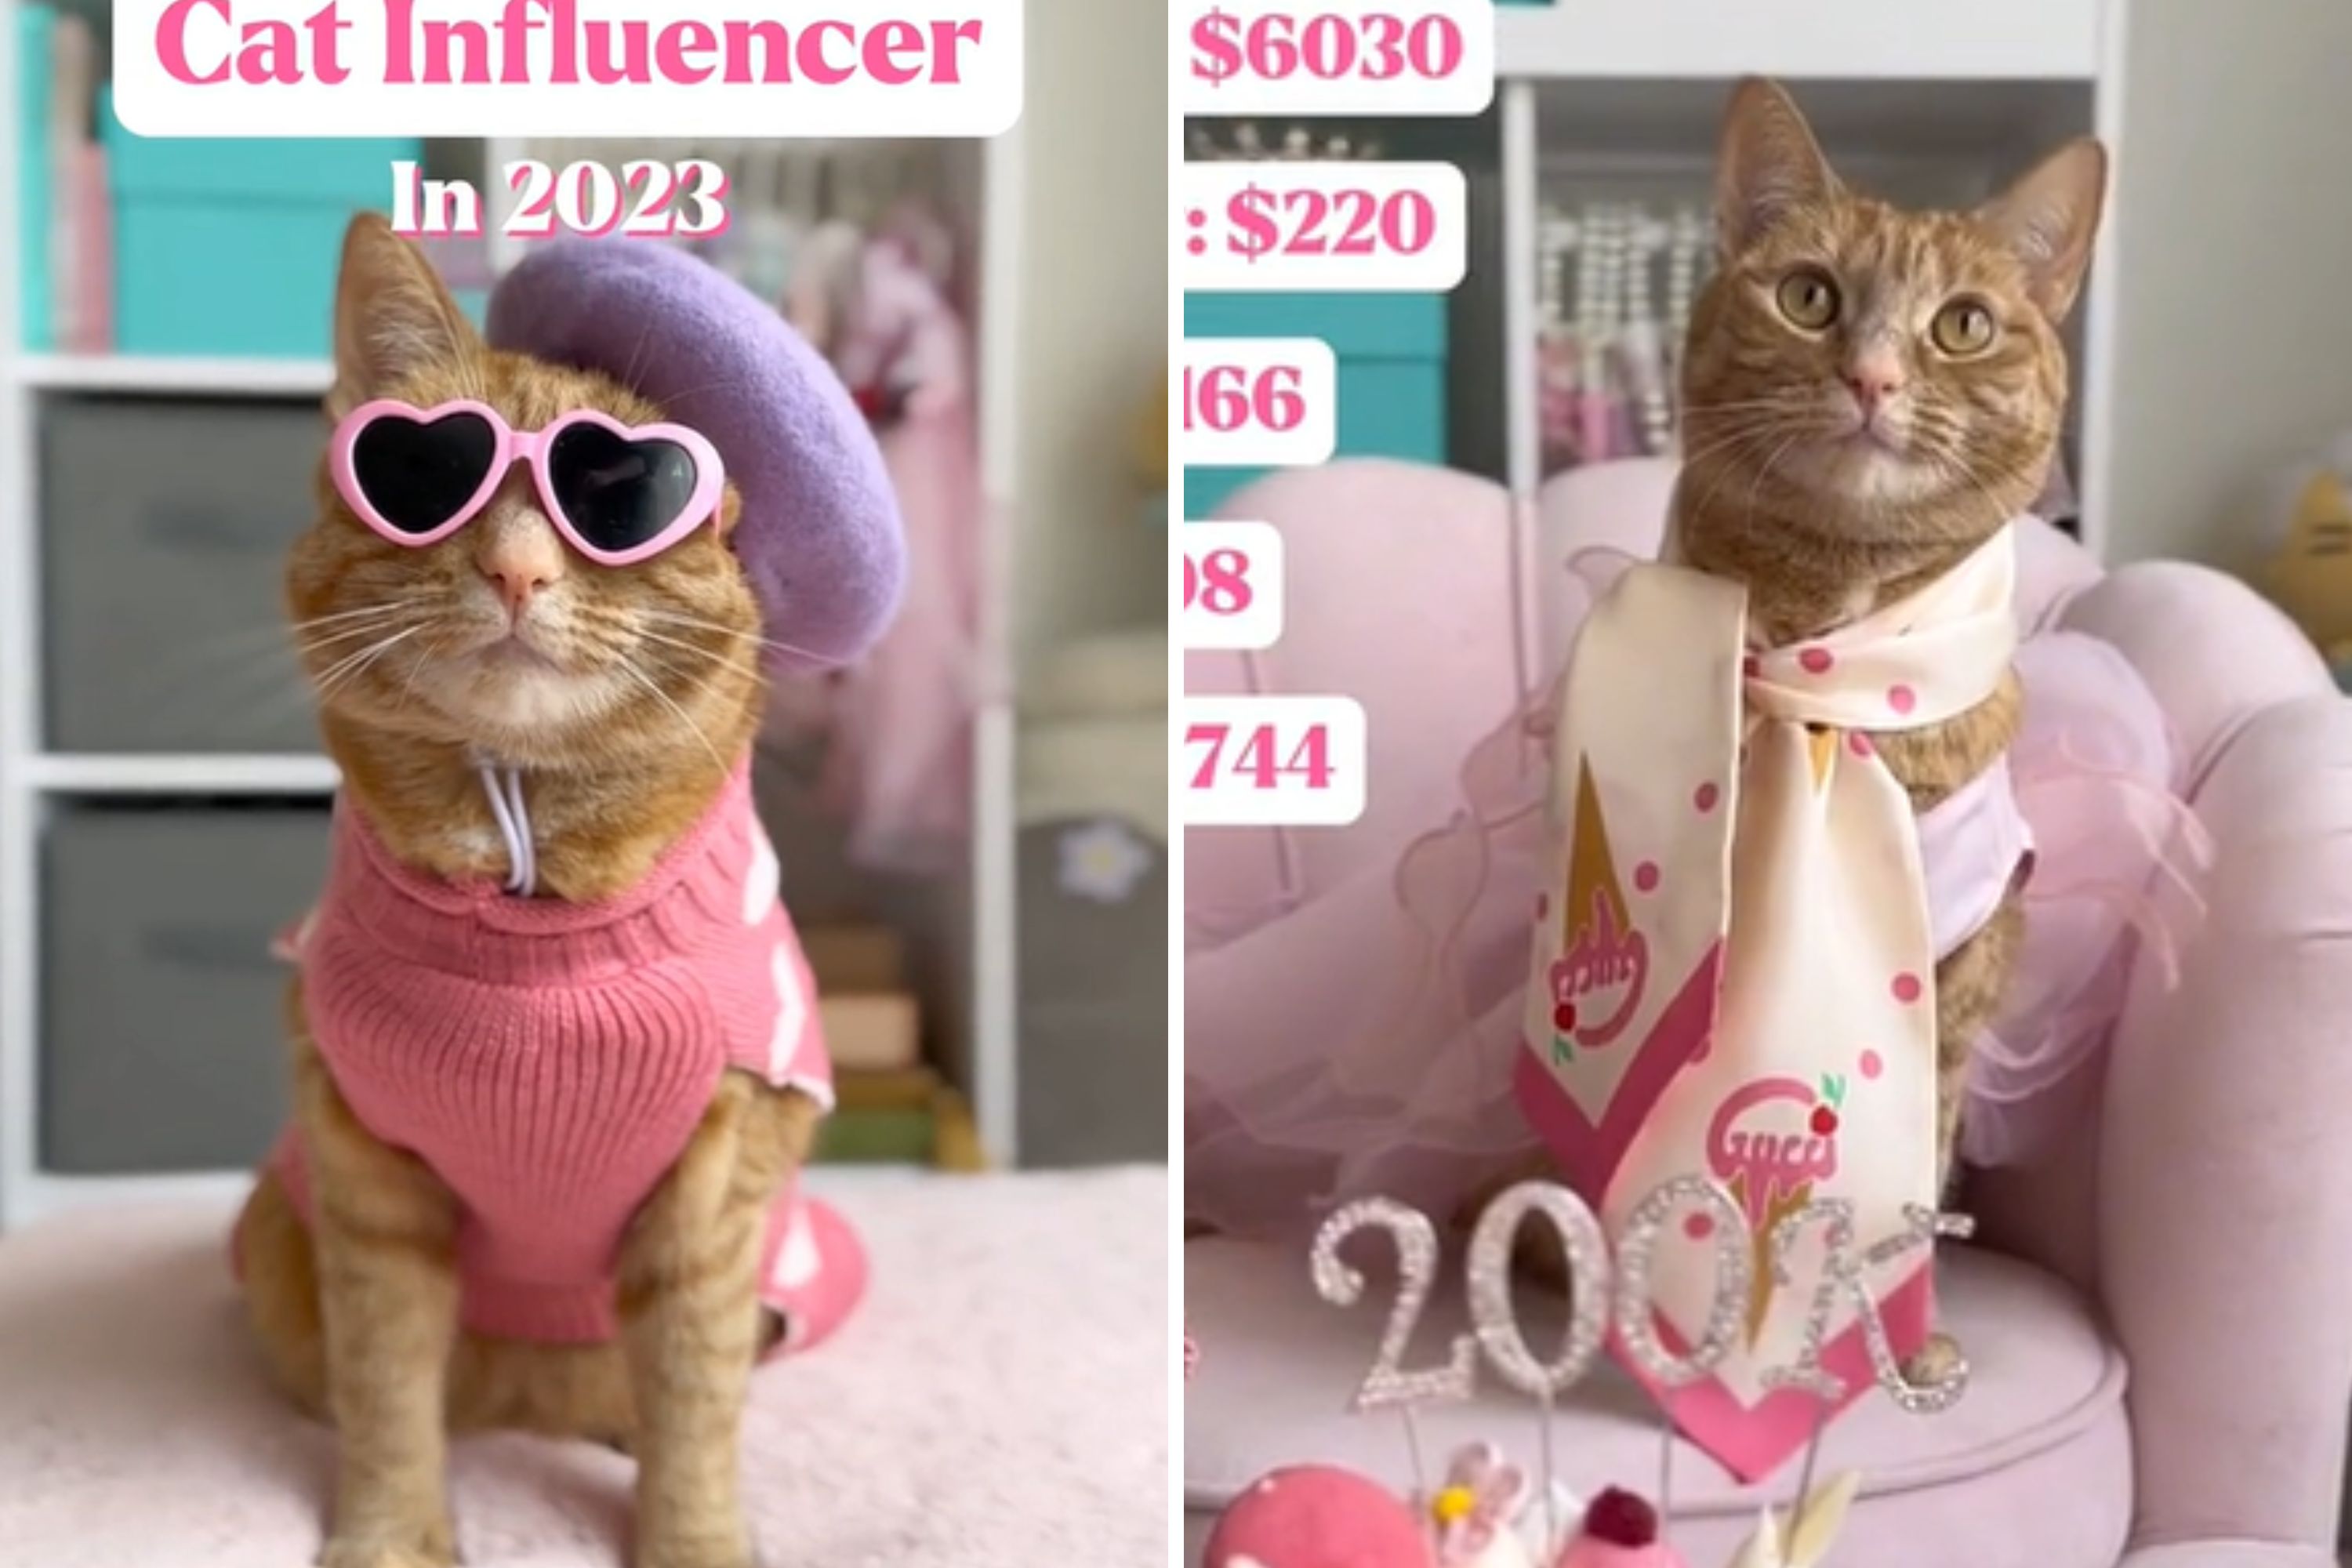 Cat Influencer Sharing 2023 Earnings Inspires Internet: ‘Put Them to Work’